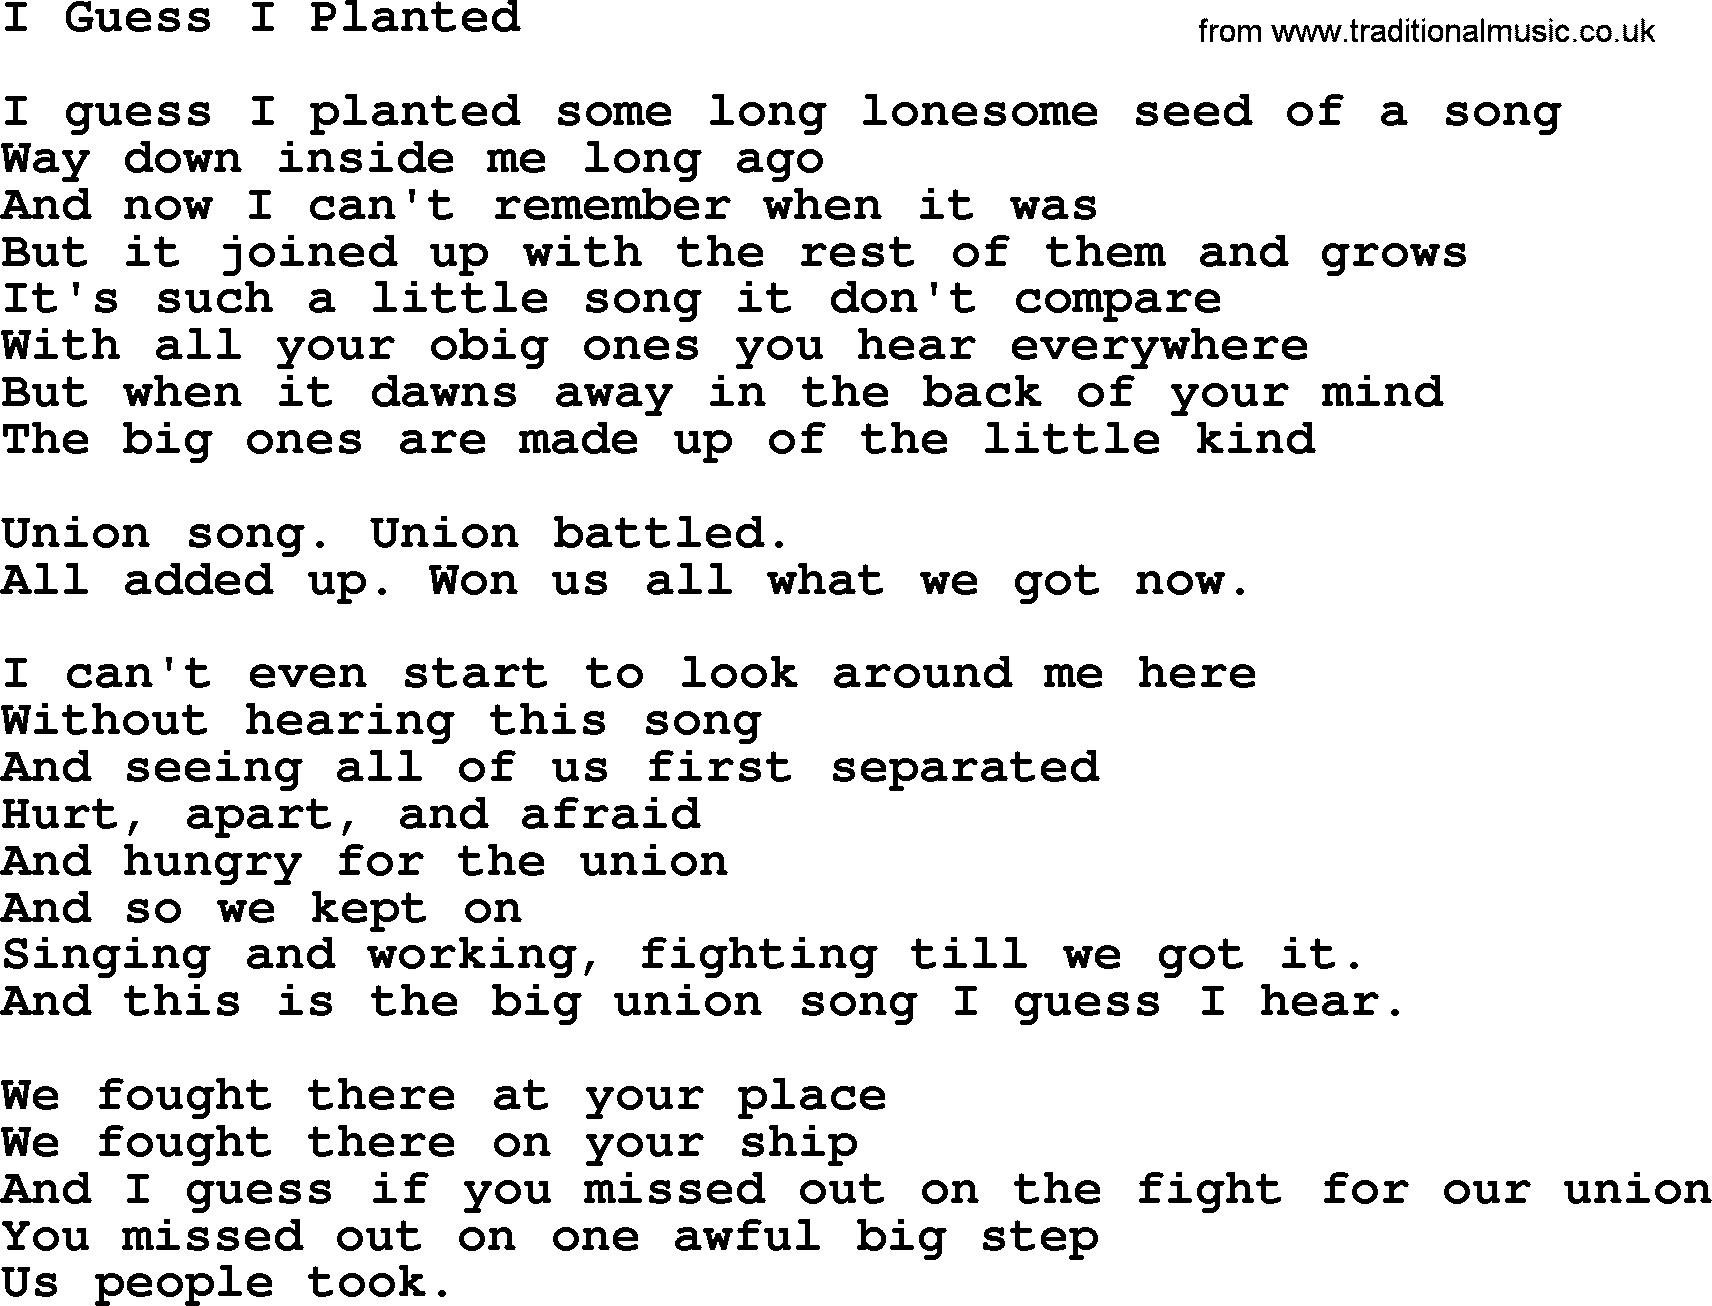 Woody Guthrie song I Guess I Planted lyrics